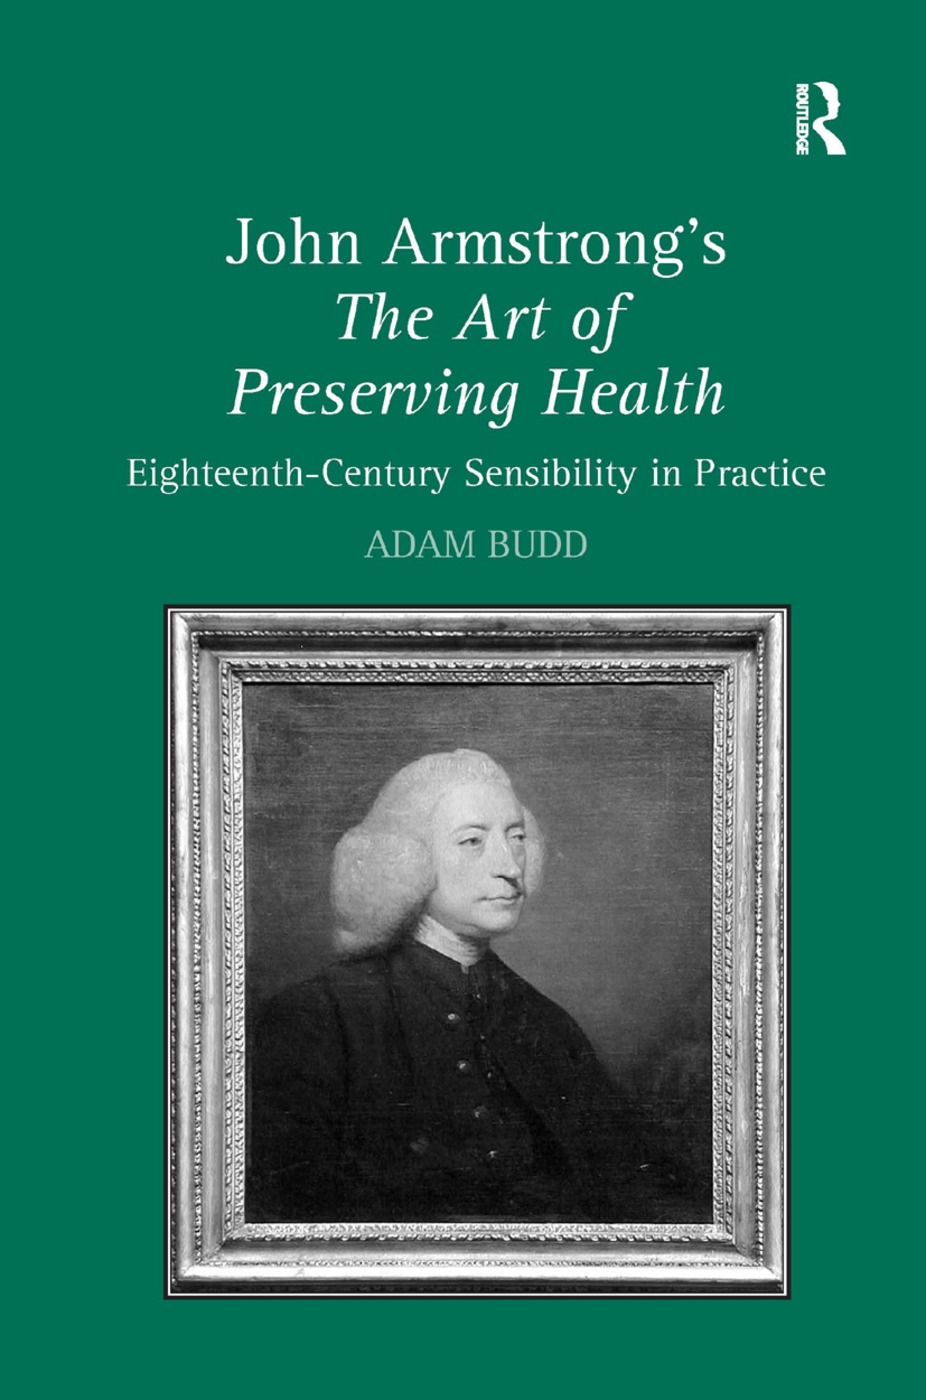 John Armstrong’s The Art of Preserving Health